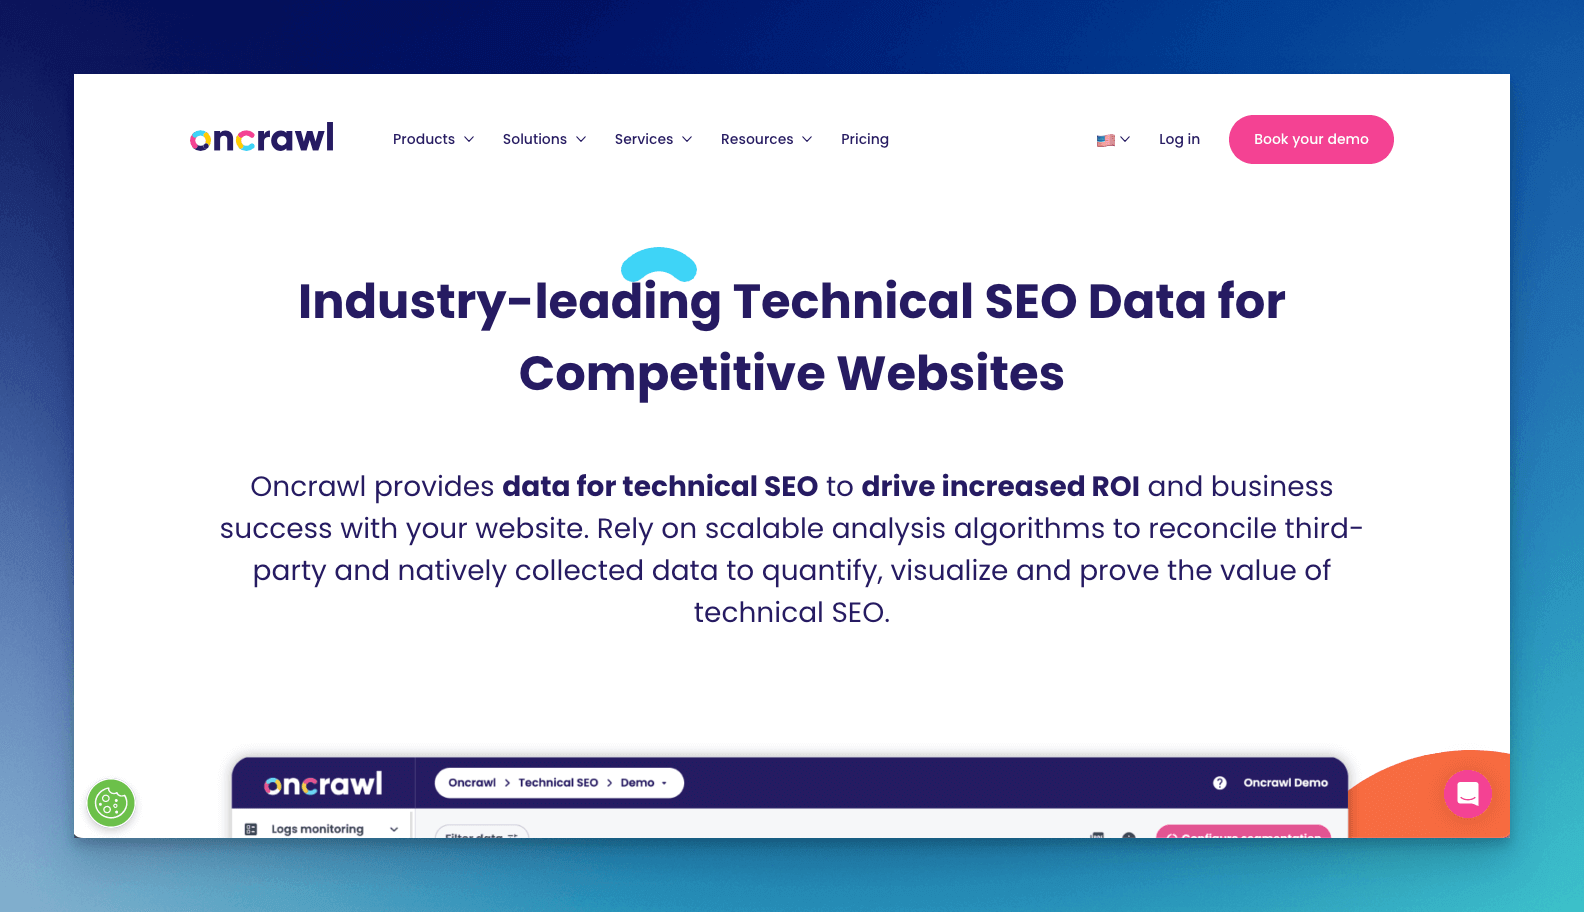 OnCrawl seo crawler tool homepage with a copy that says "Industry-leading Technical SEO Data for Competitive Websites"